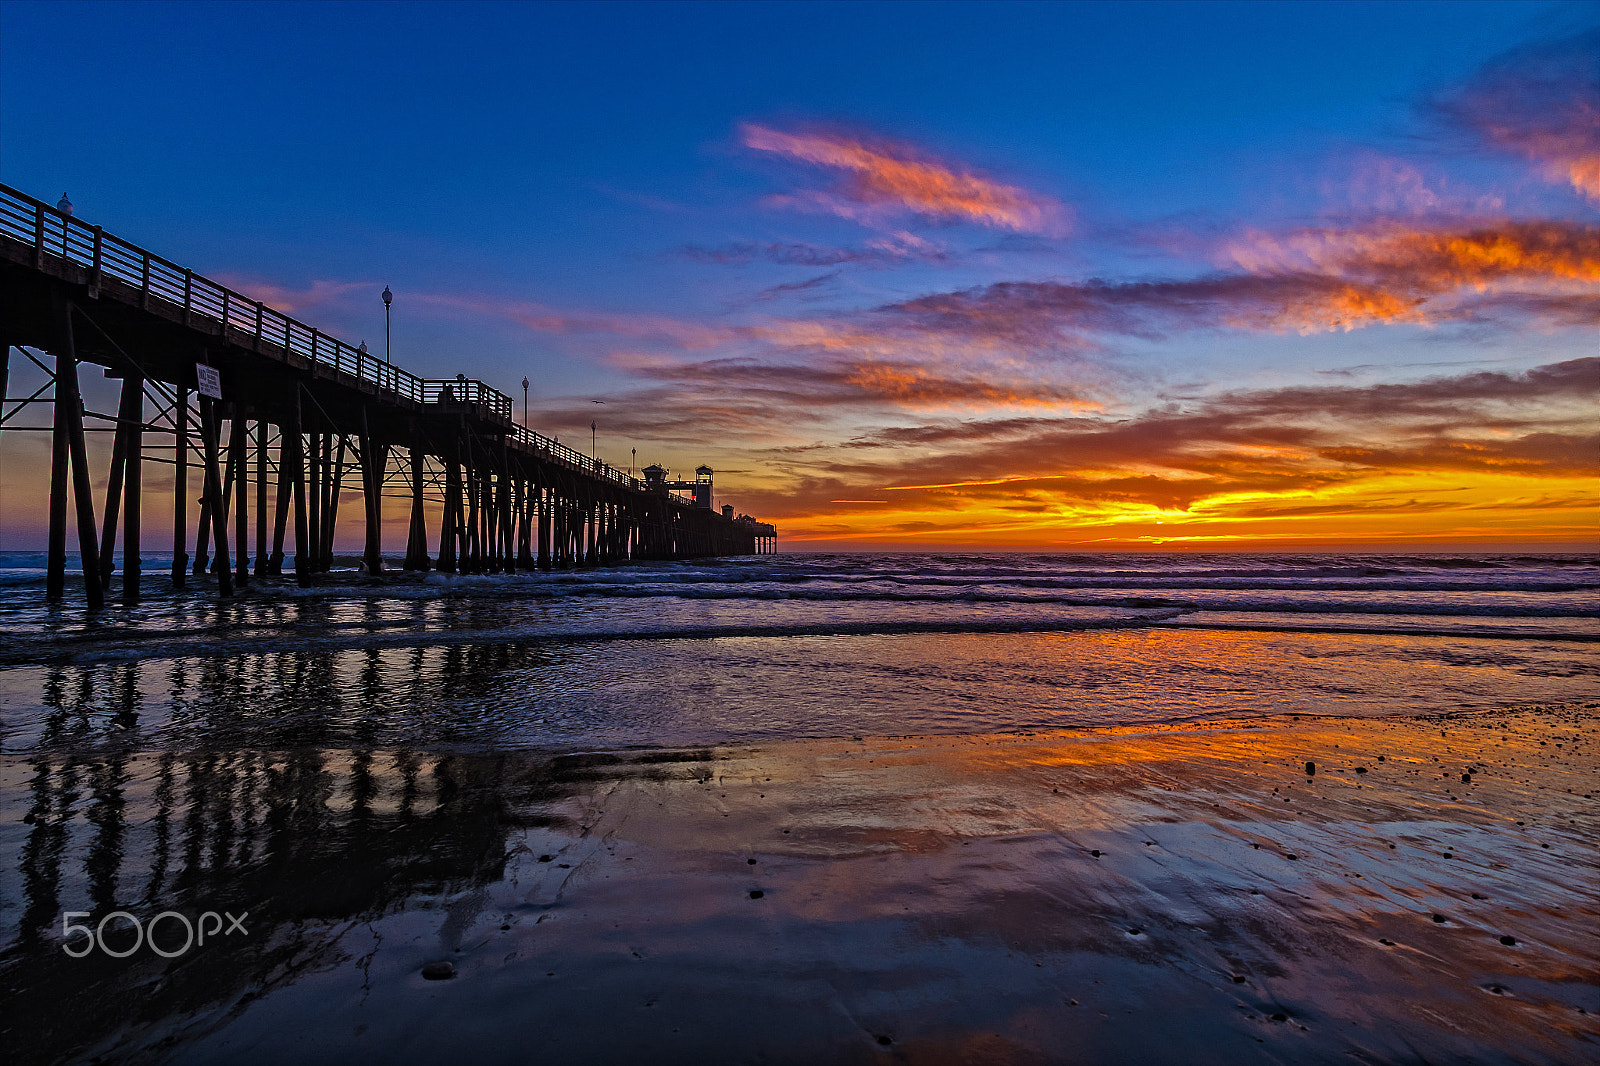 Nikon D500 sample photo. Colorful sunset at the oceanside pier - february 15, 2017 photography